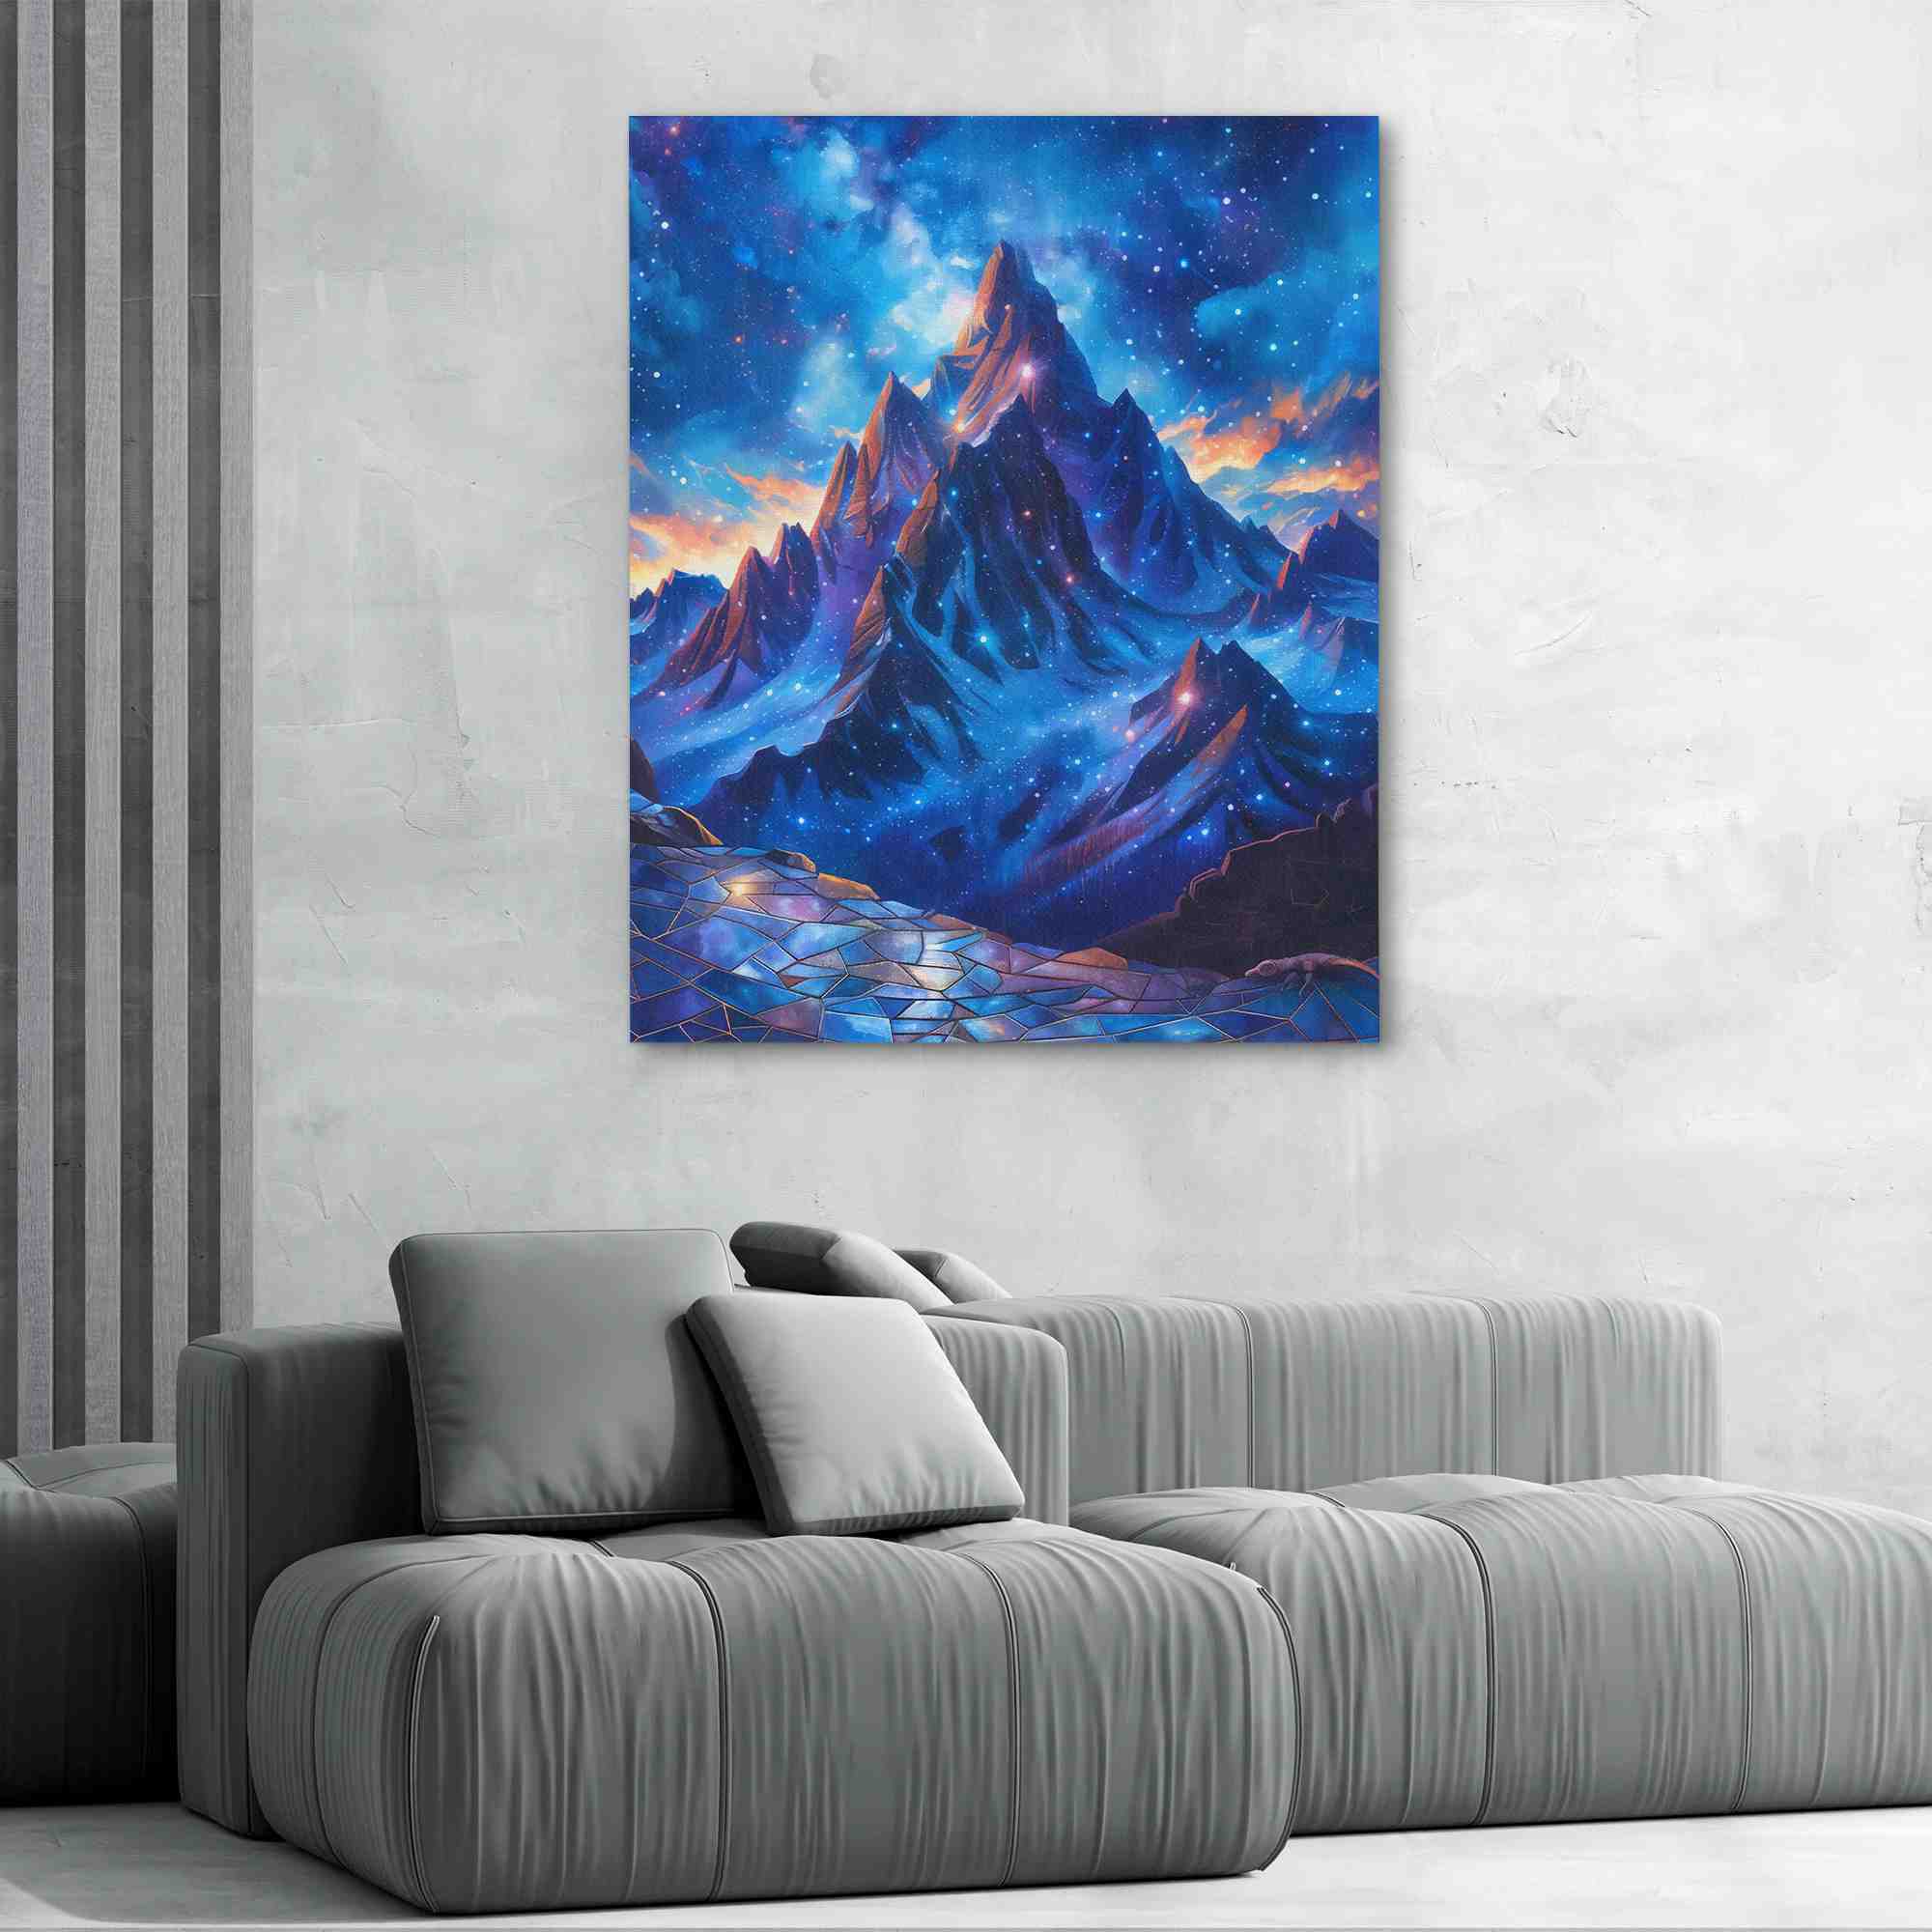 a painting of a mountain with stars in the sky